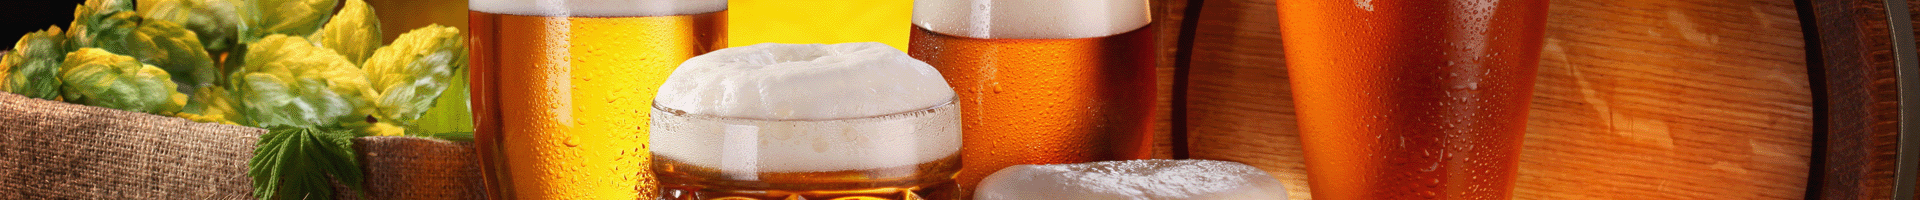 The Importance of Dissolved Oxygen Sensors in Brewing and Beverage Manufacturing